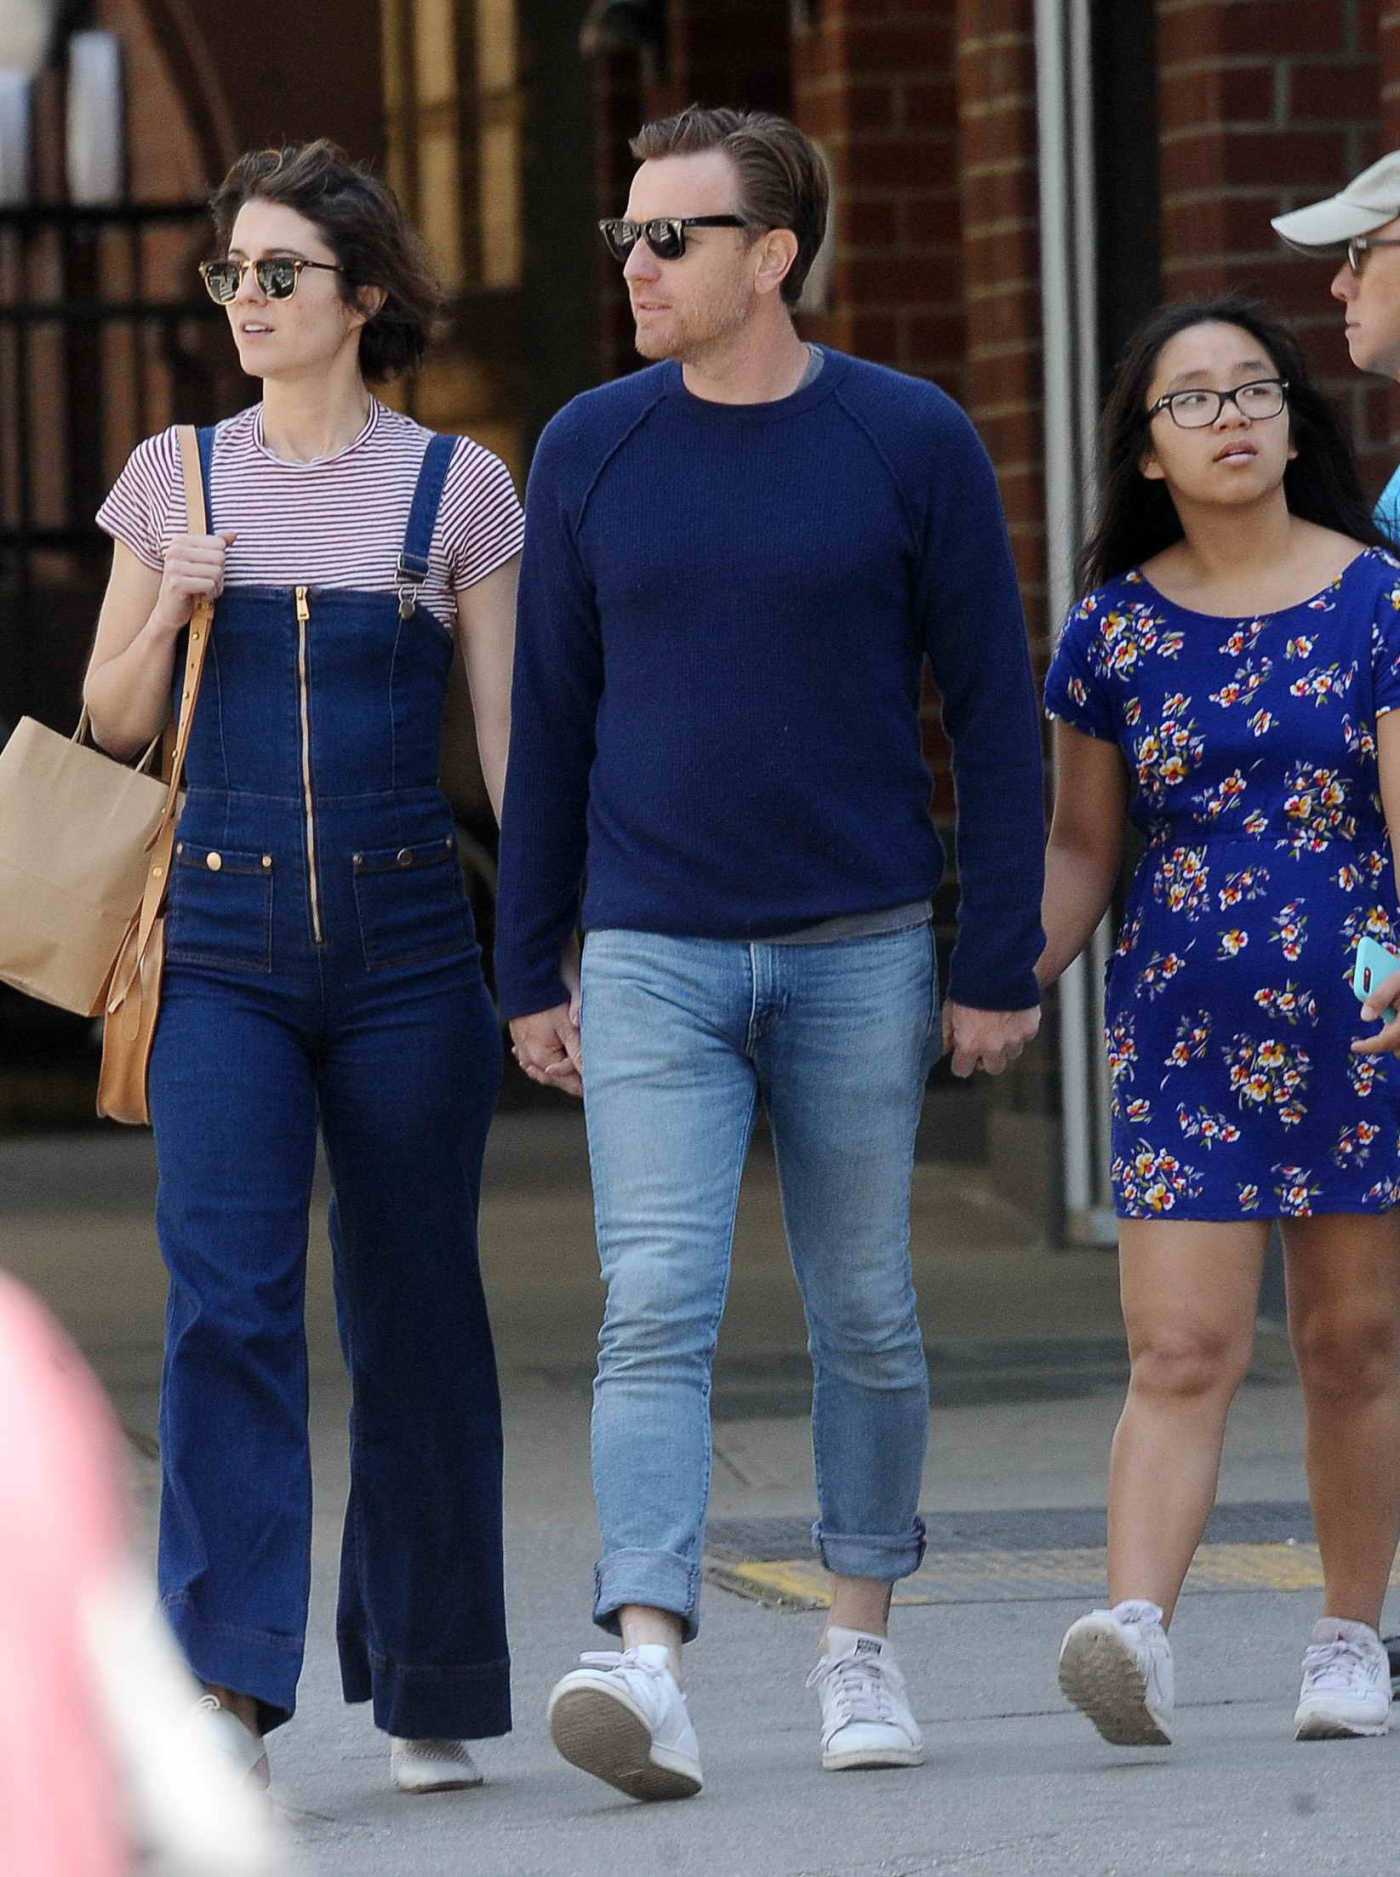 Ewan McGregor Was Seen Out with Mary Elizabeth Winstead in NYC 06/04/2019